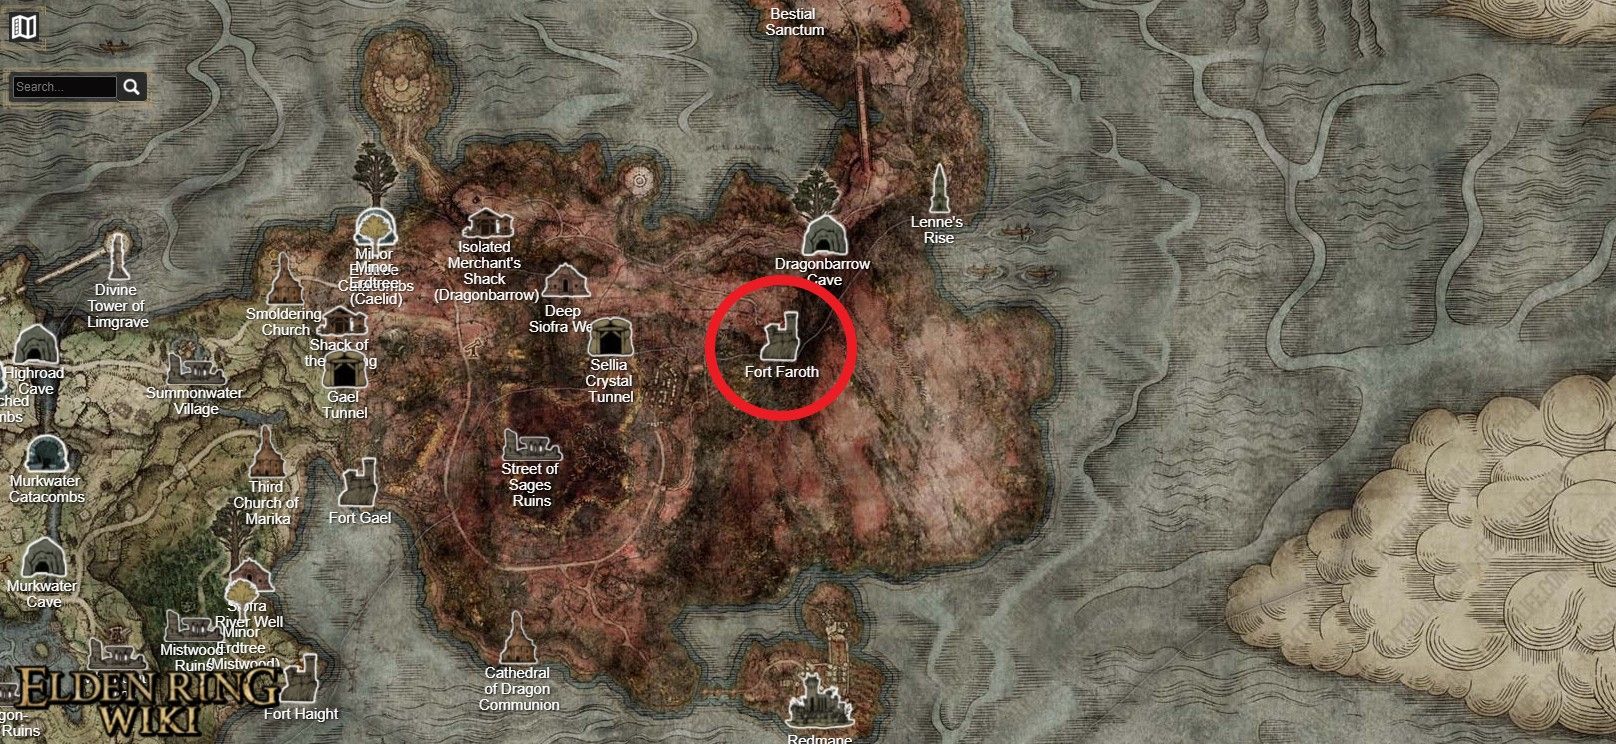 Elden Ring Fort Faroth Where To Find & Location